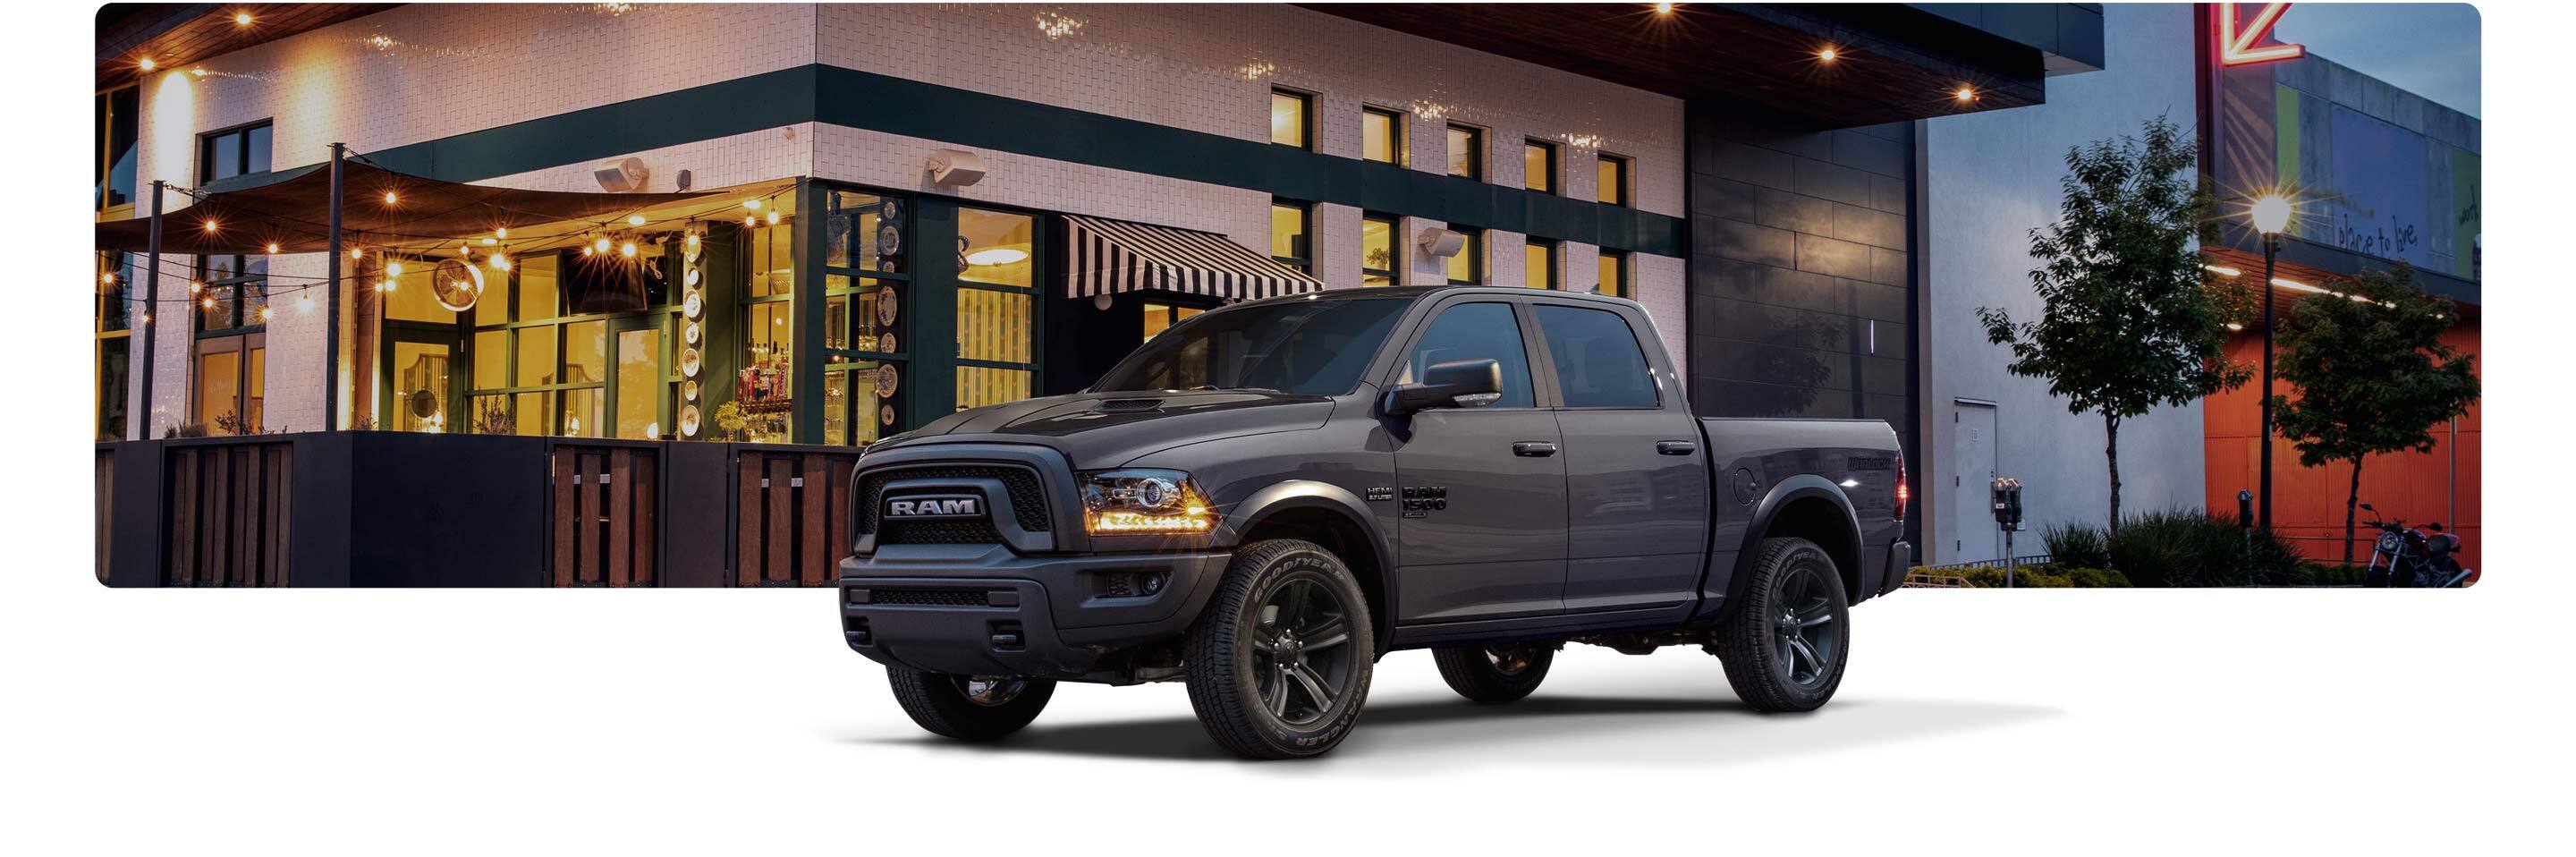 The 2021 Ram 1500 Classic parked outside a brightly lit restaurant patio.